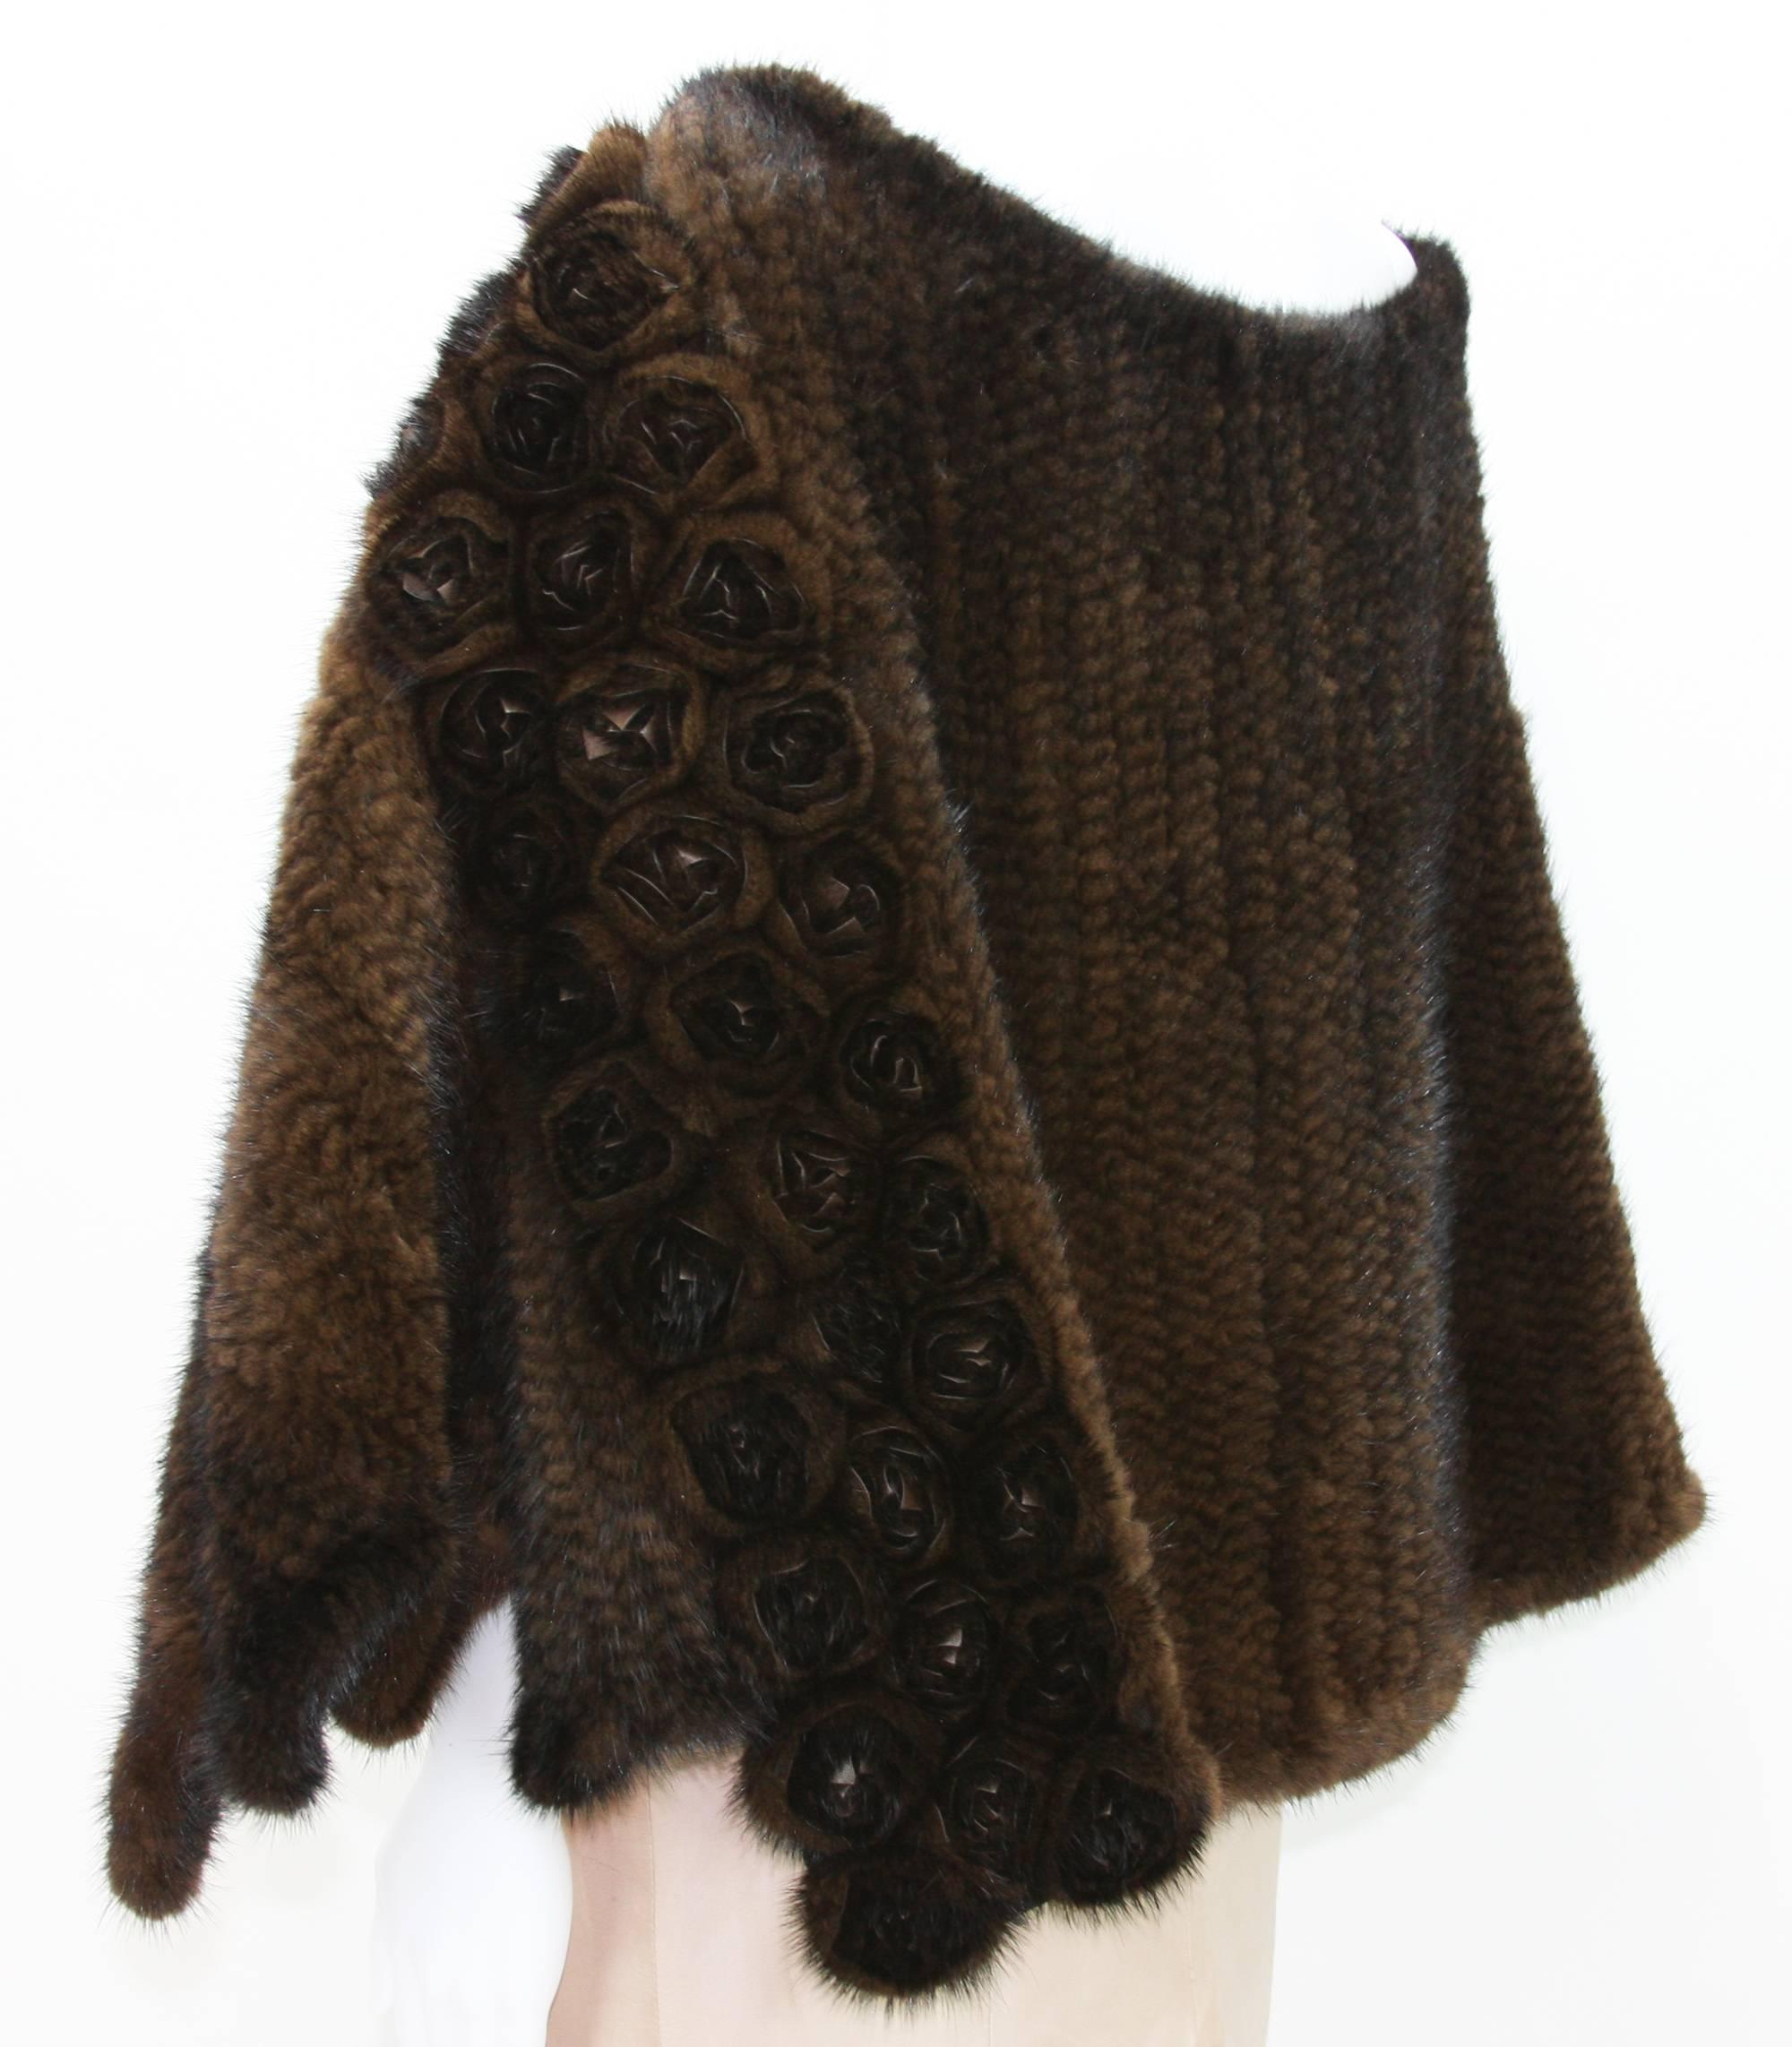 New Etro Knitted Mink Poncho Cape with Leather Mink Roses 3